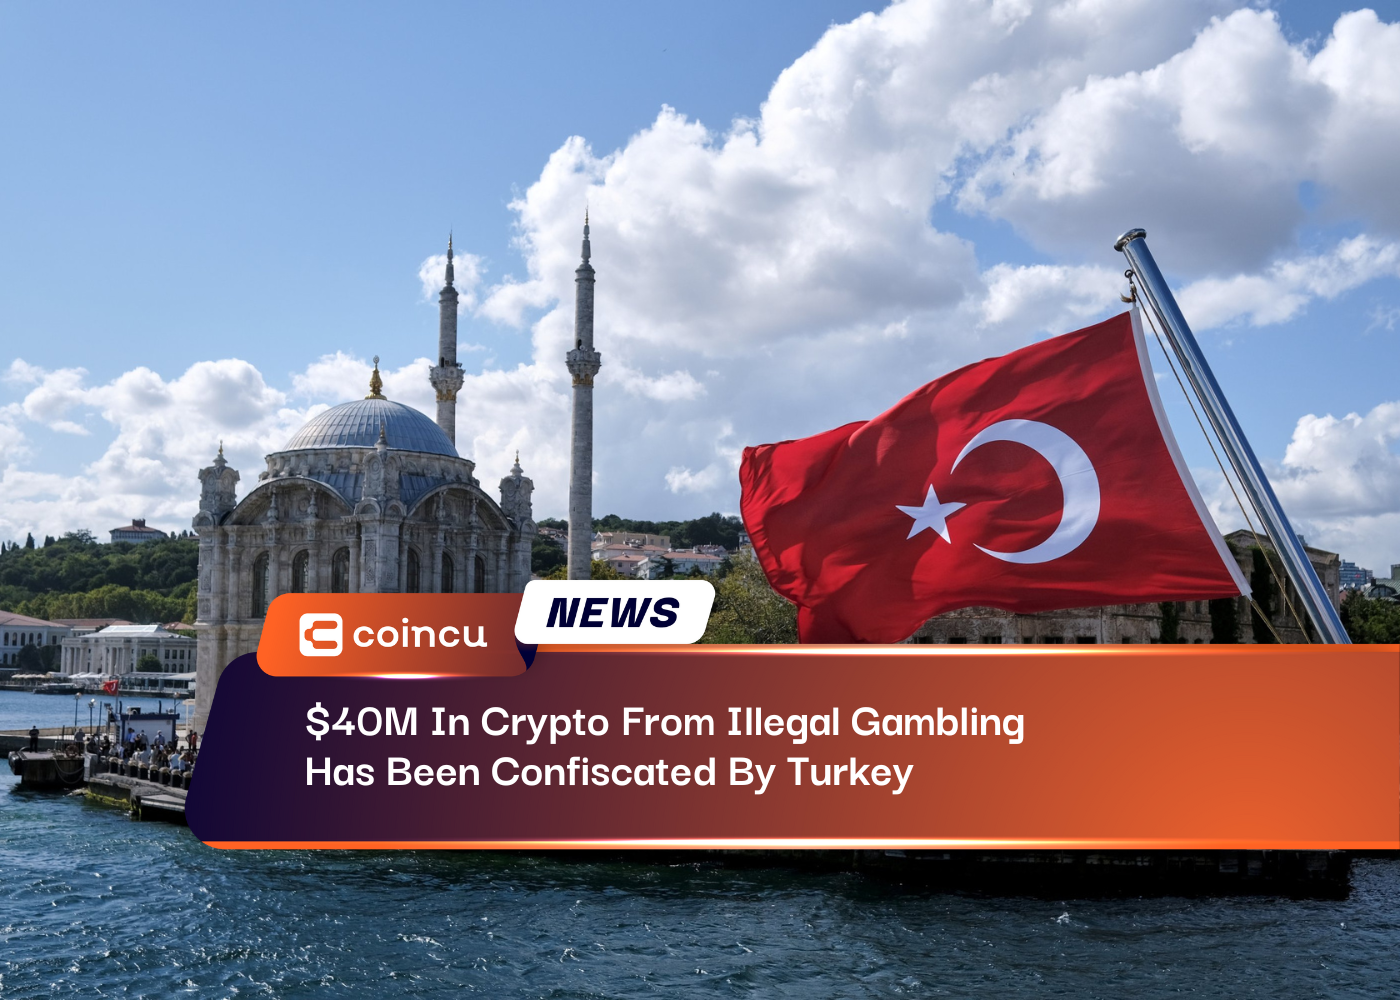 $40M In Crypto From Illegal Gambling Has Been Confiscated By Turkey